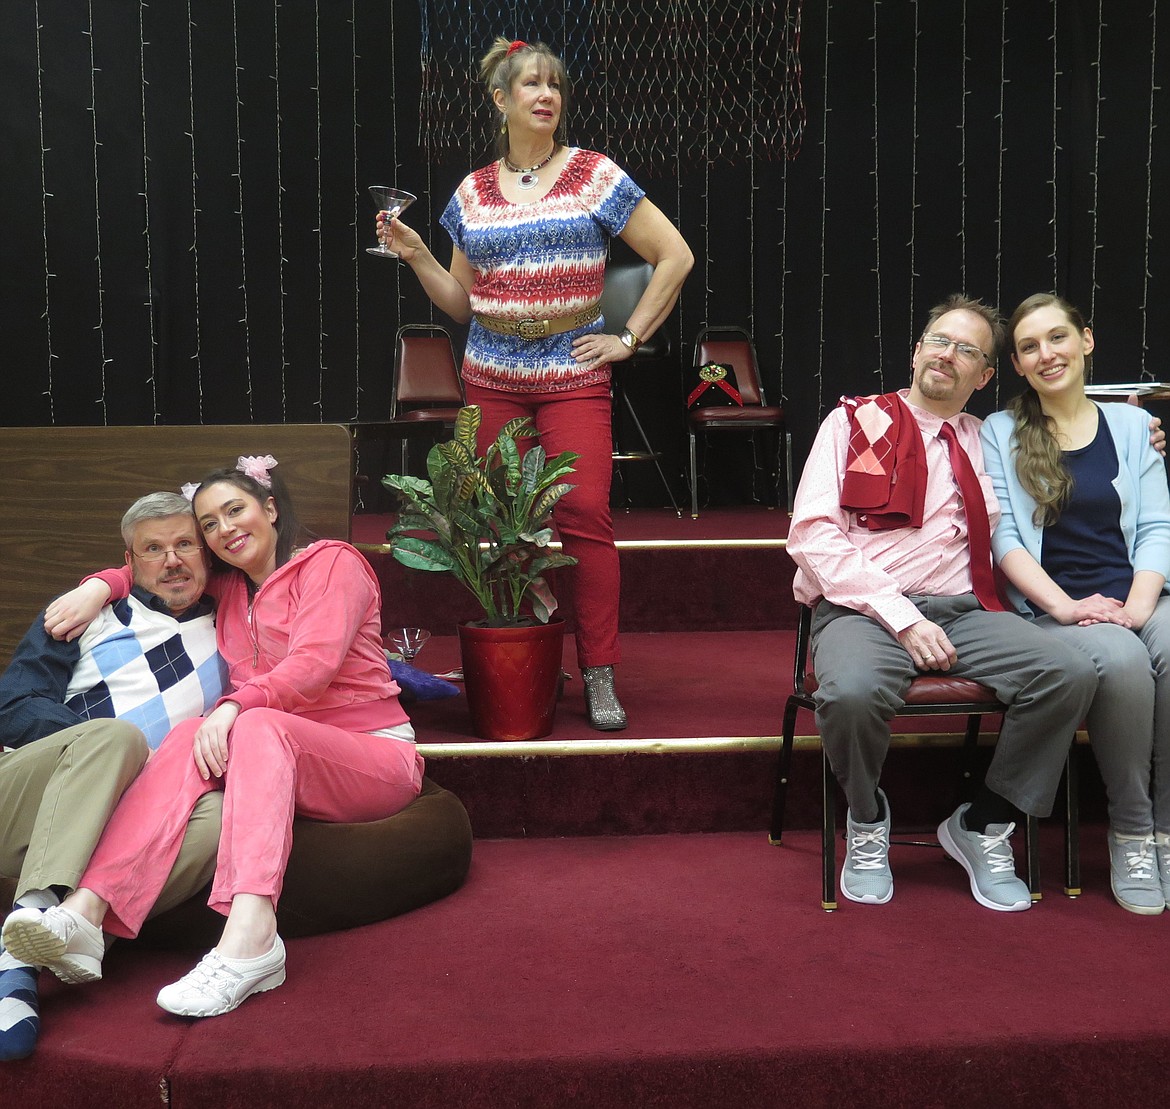 The cast of Gypsy Theatre Guild’s All Bark, No Bite” —Tony Nelson as Eugene; Amy Galt as Bella; JeAnna Wisher as Suzanne; Roger Idaho as Robert; and Haley Wolfe as Charlotte.